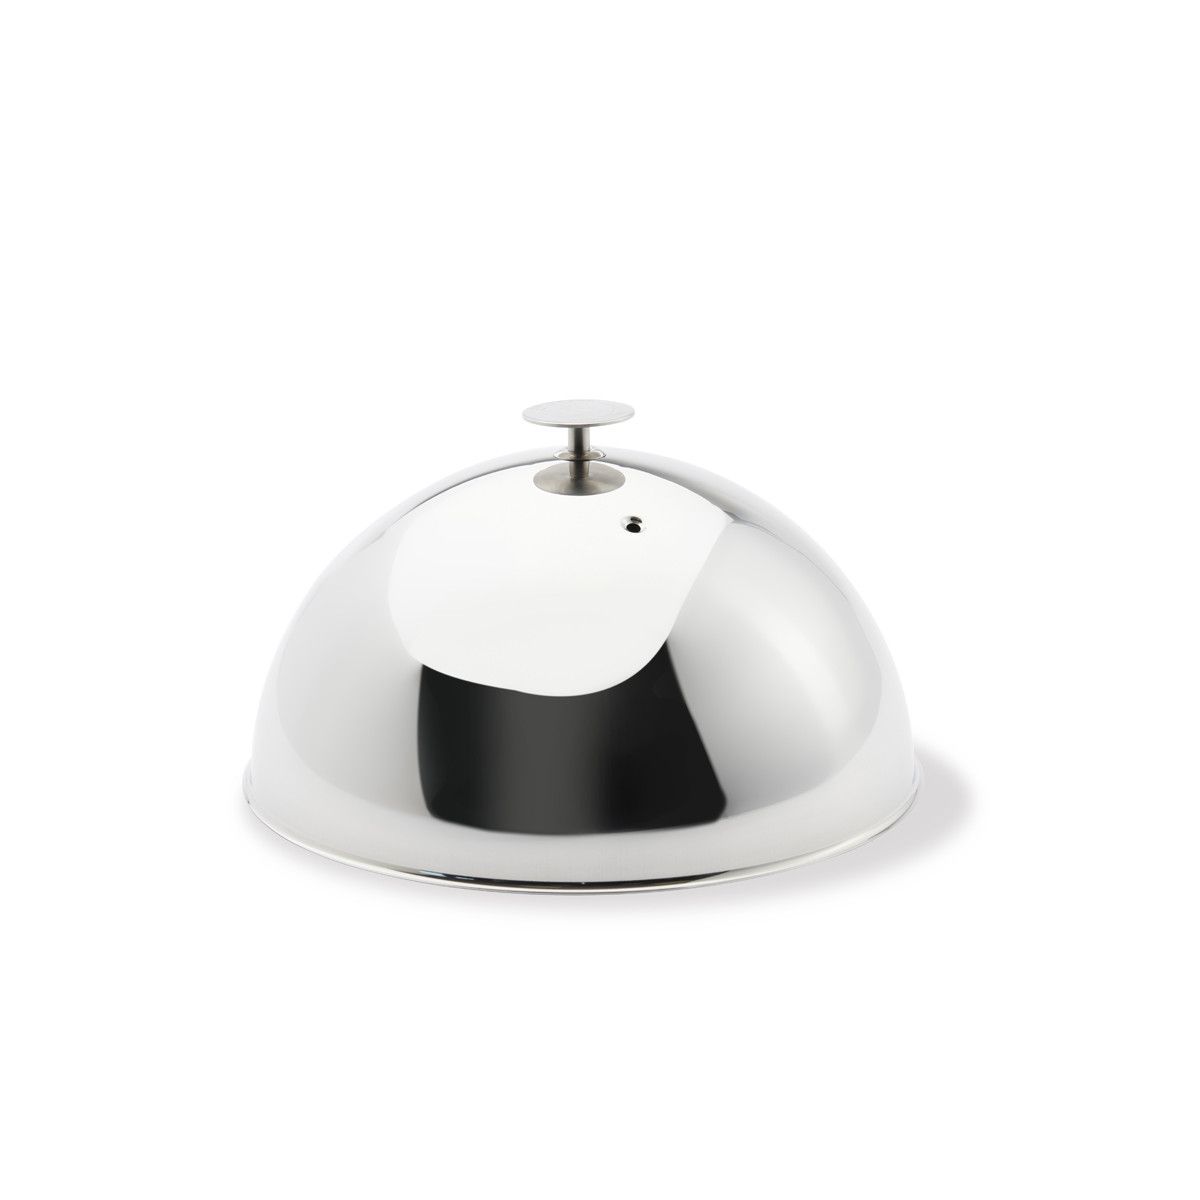 de Buyer - Stainless Steel Cooking Bell, 30 cm diameter, with steam hole